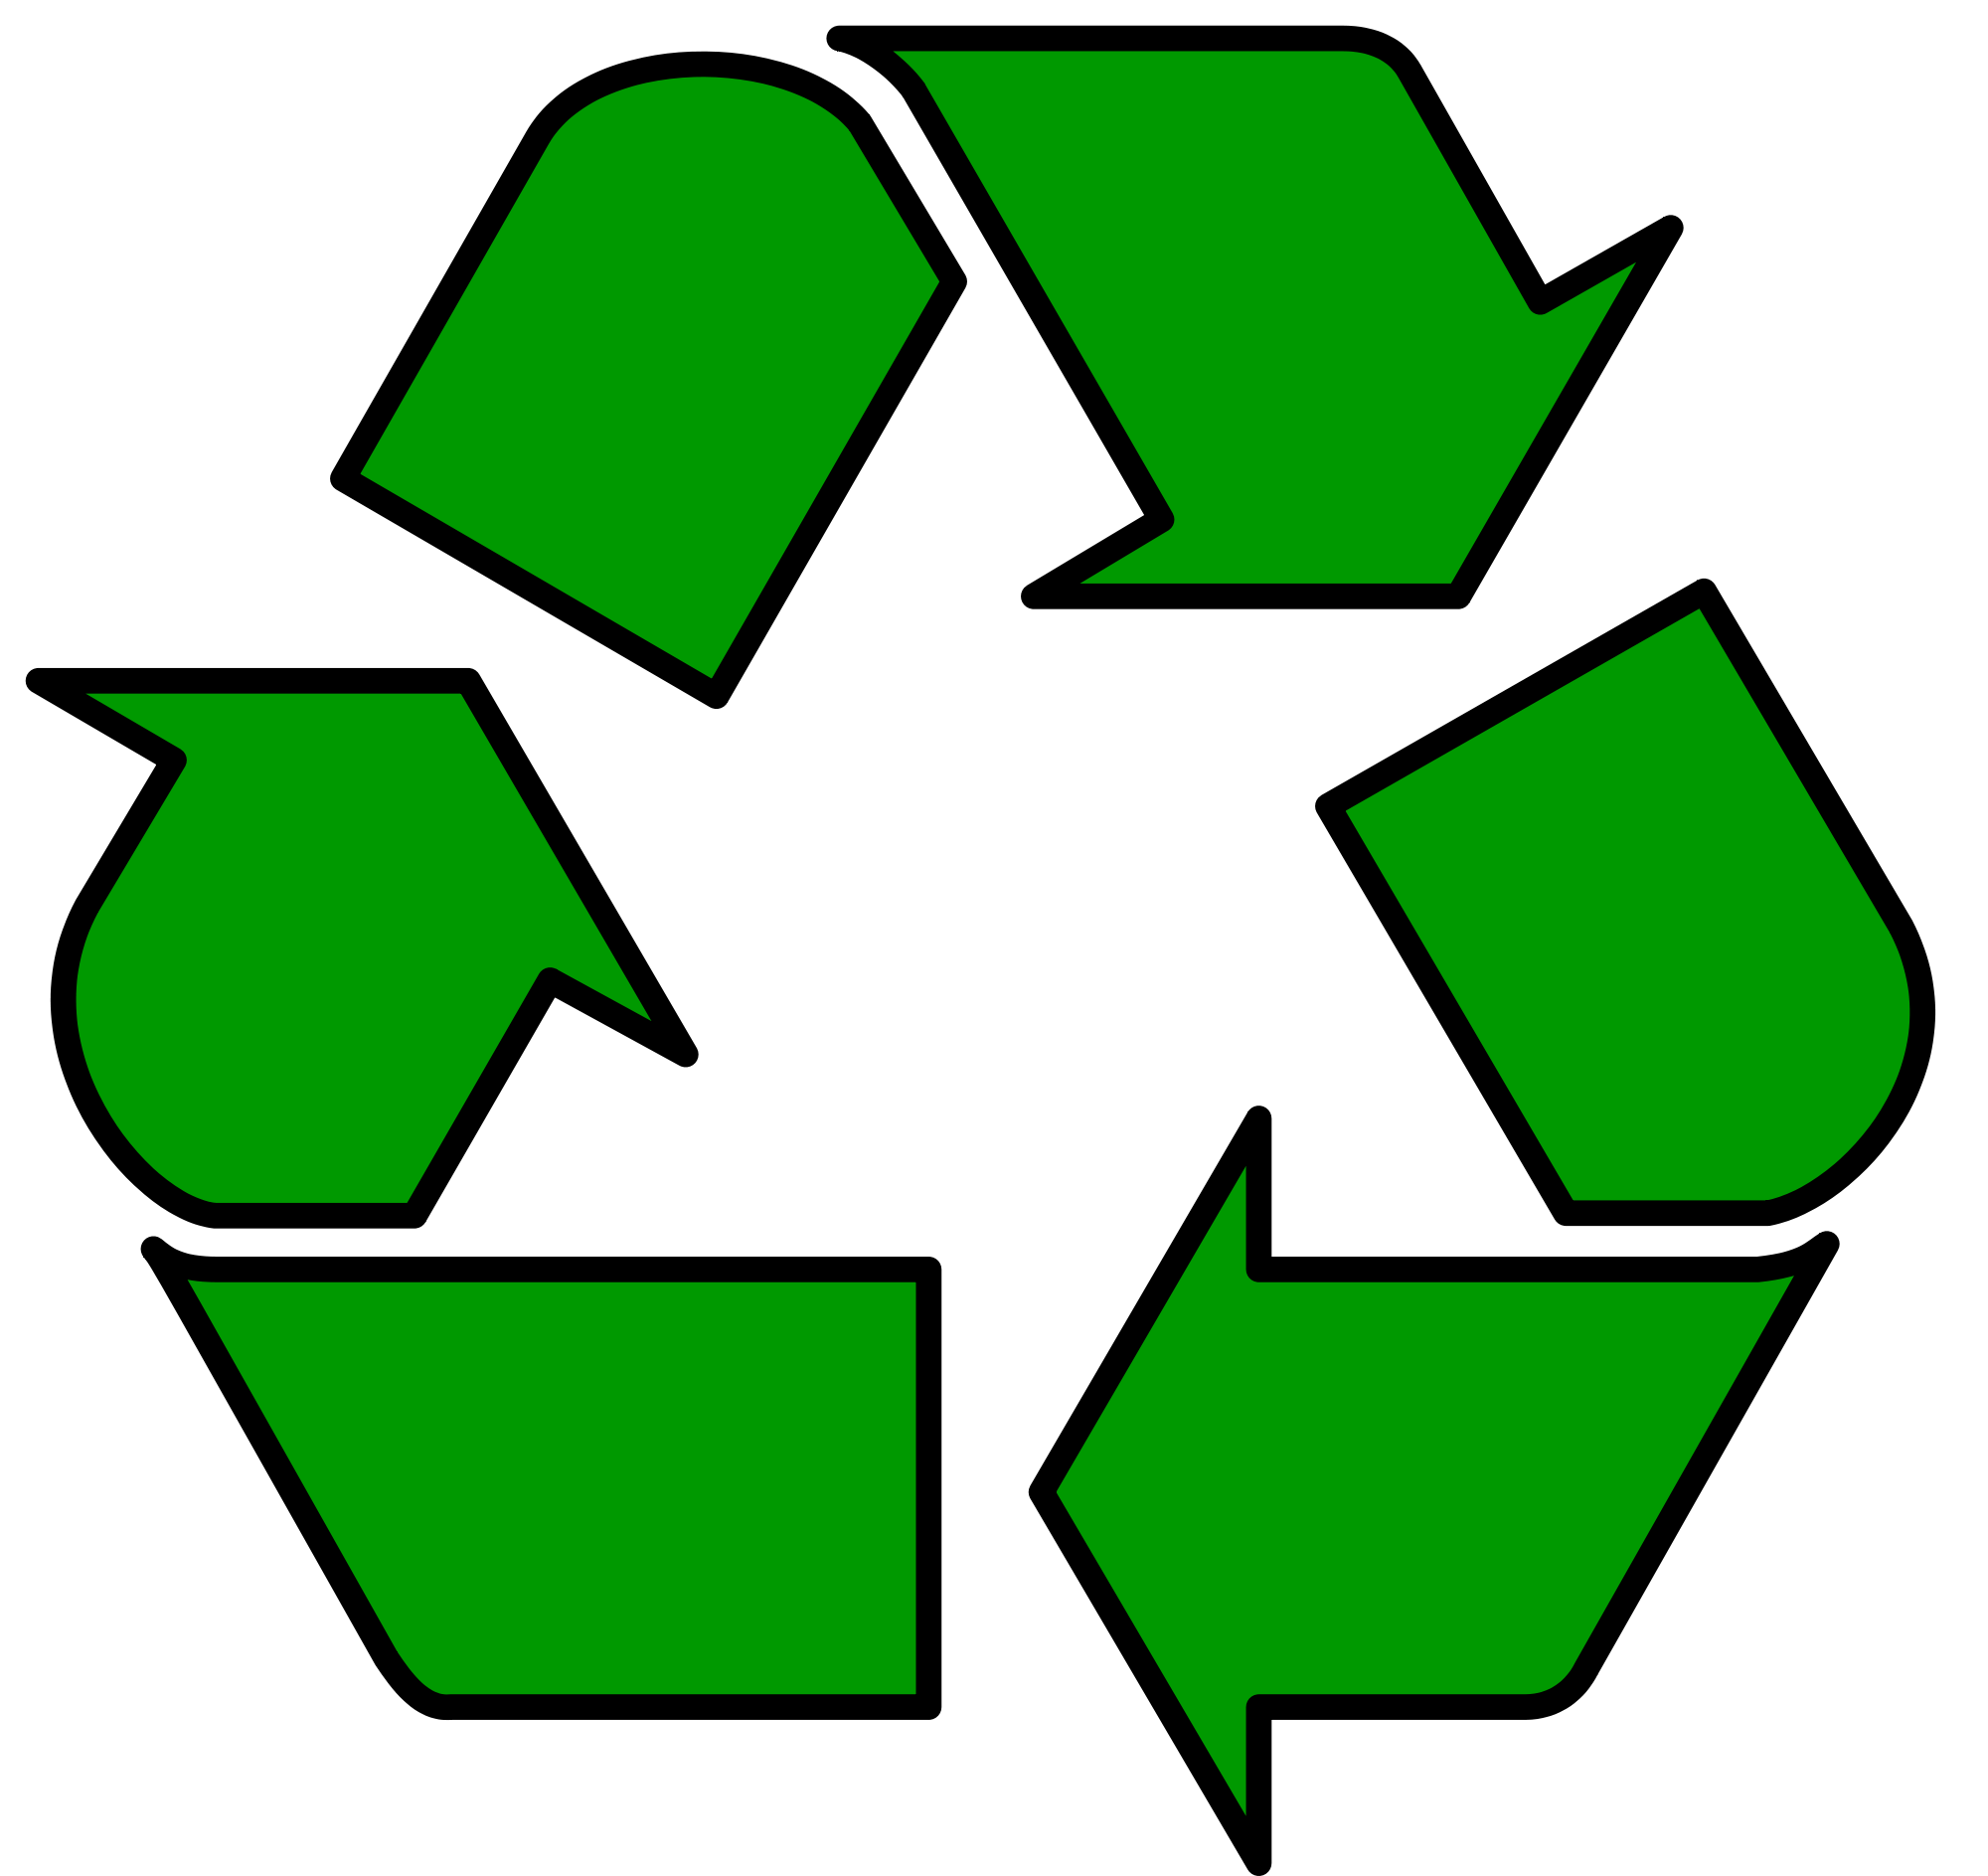 Free Recycling Symbol Printable, Download Free Clip Art, Free Clip Art